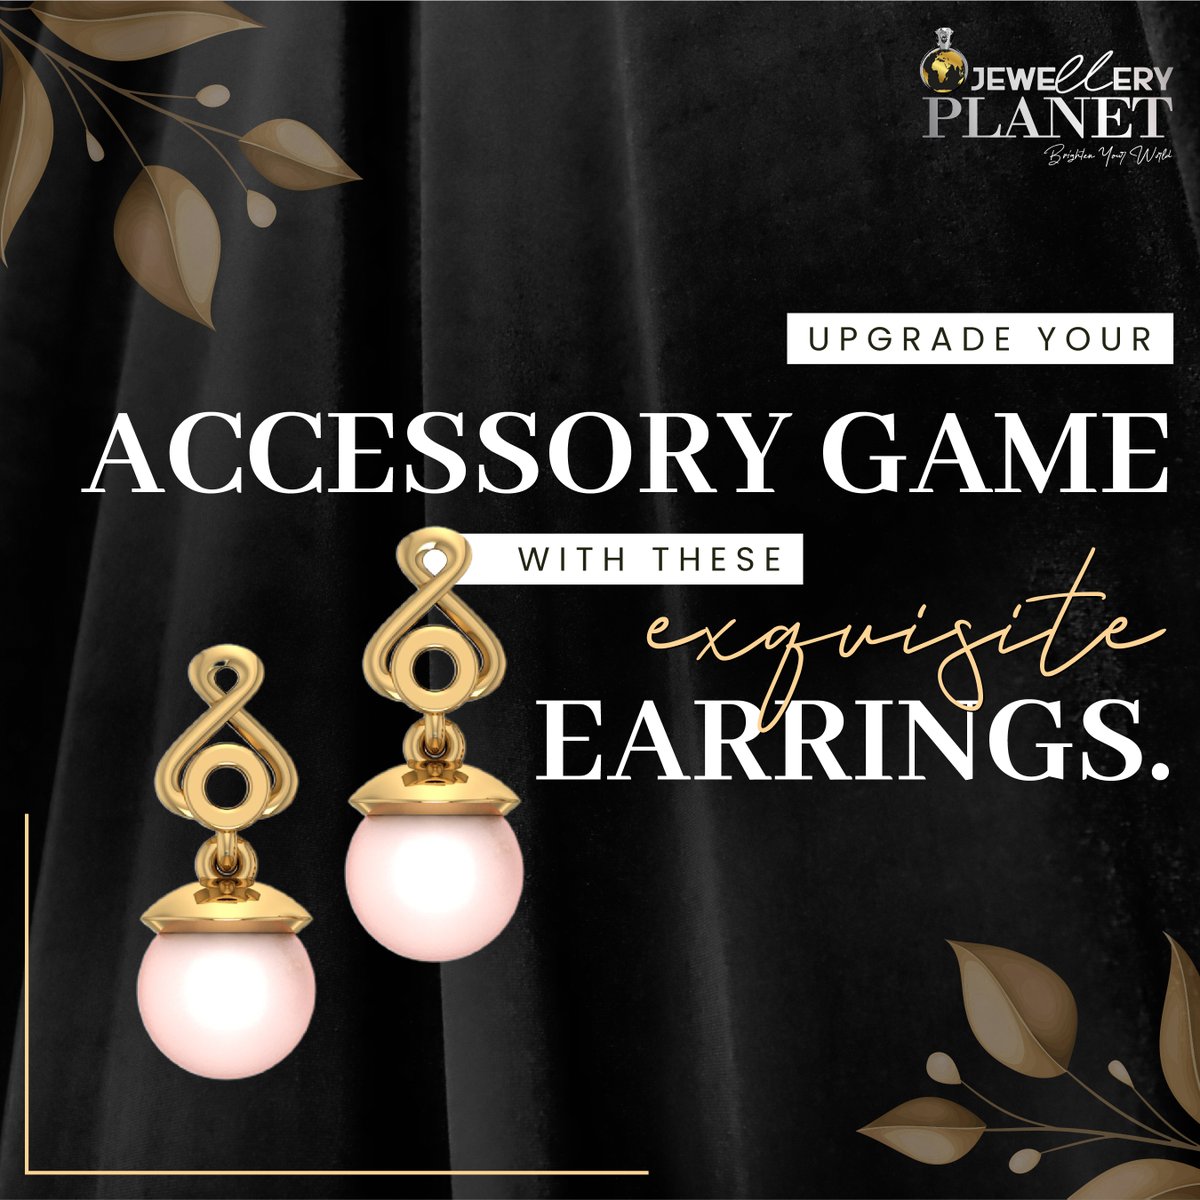 From casual to formal, these earrings are perfect for any occasion. Treat yourself to these beautiful and unique earrings.

WhatsApp: +91 70481 60835

#jewelleryplanet #jewelry #jewellerydesign #bestjewelry #earrings #jewelryearrings #indianjewellery #wedding #diamond